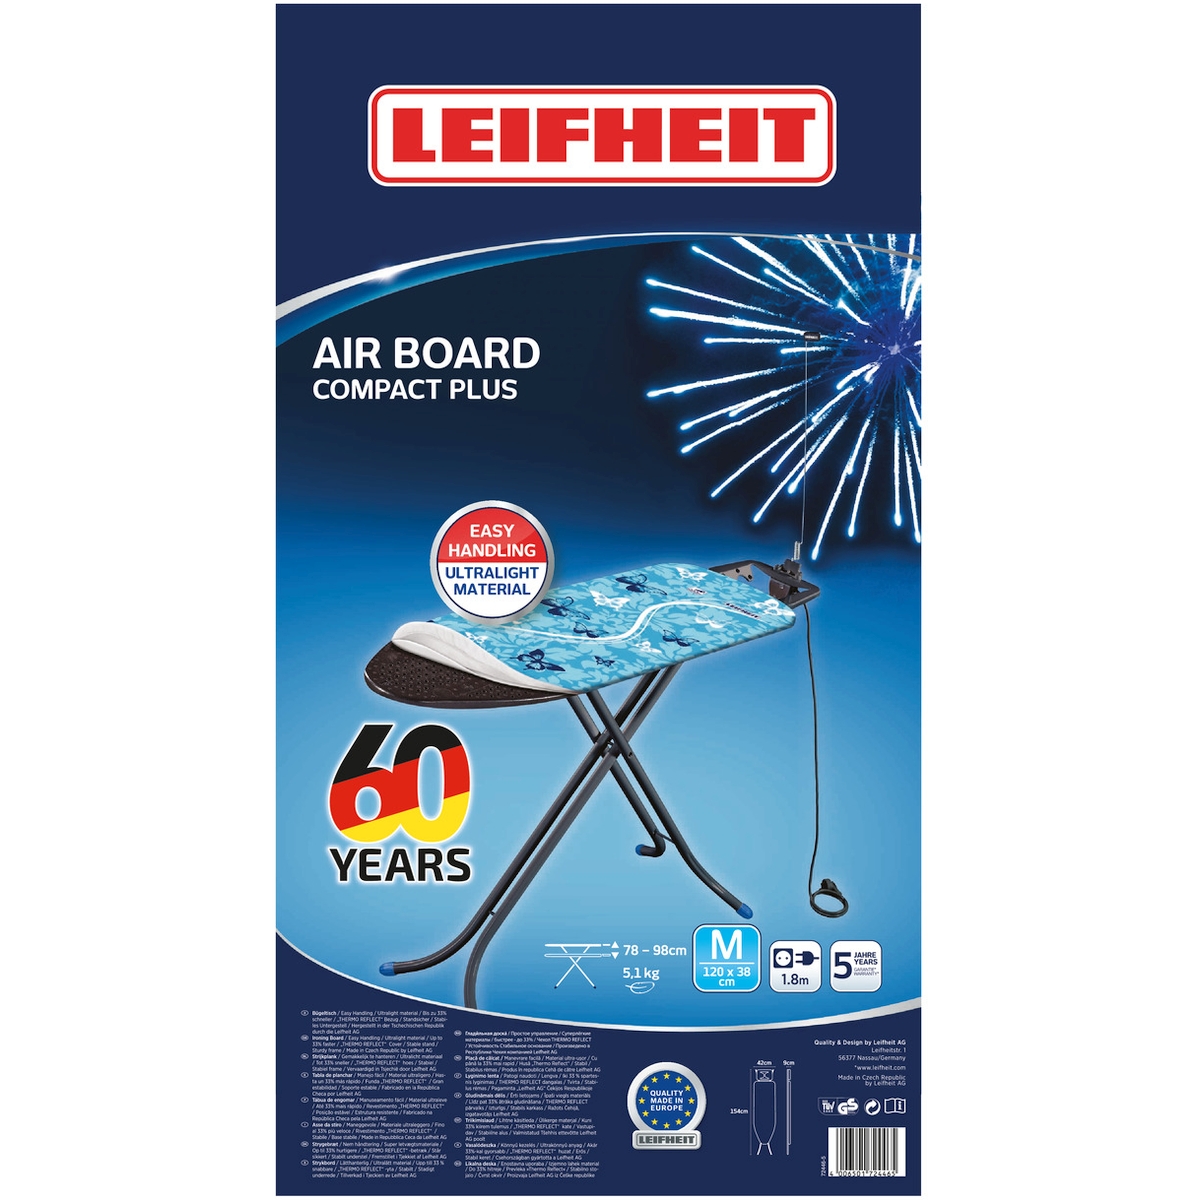   AirBoard Compact Plus M 60 Years Edition,  (Leifheit 72446)